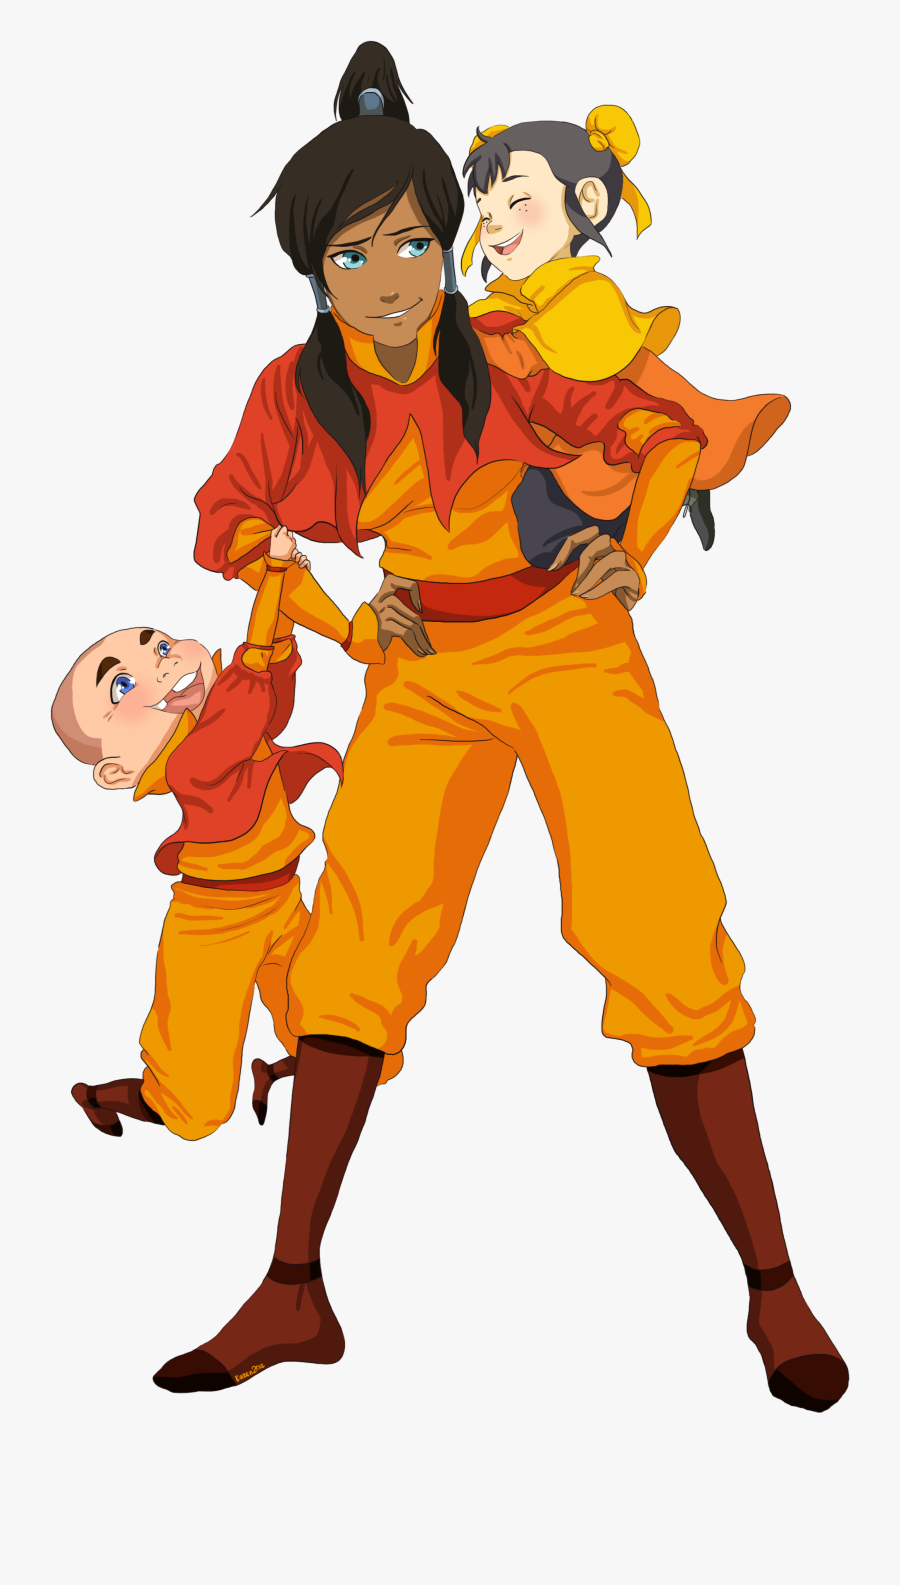 Avatar The Last Airbender Png, Transparent Clipart